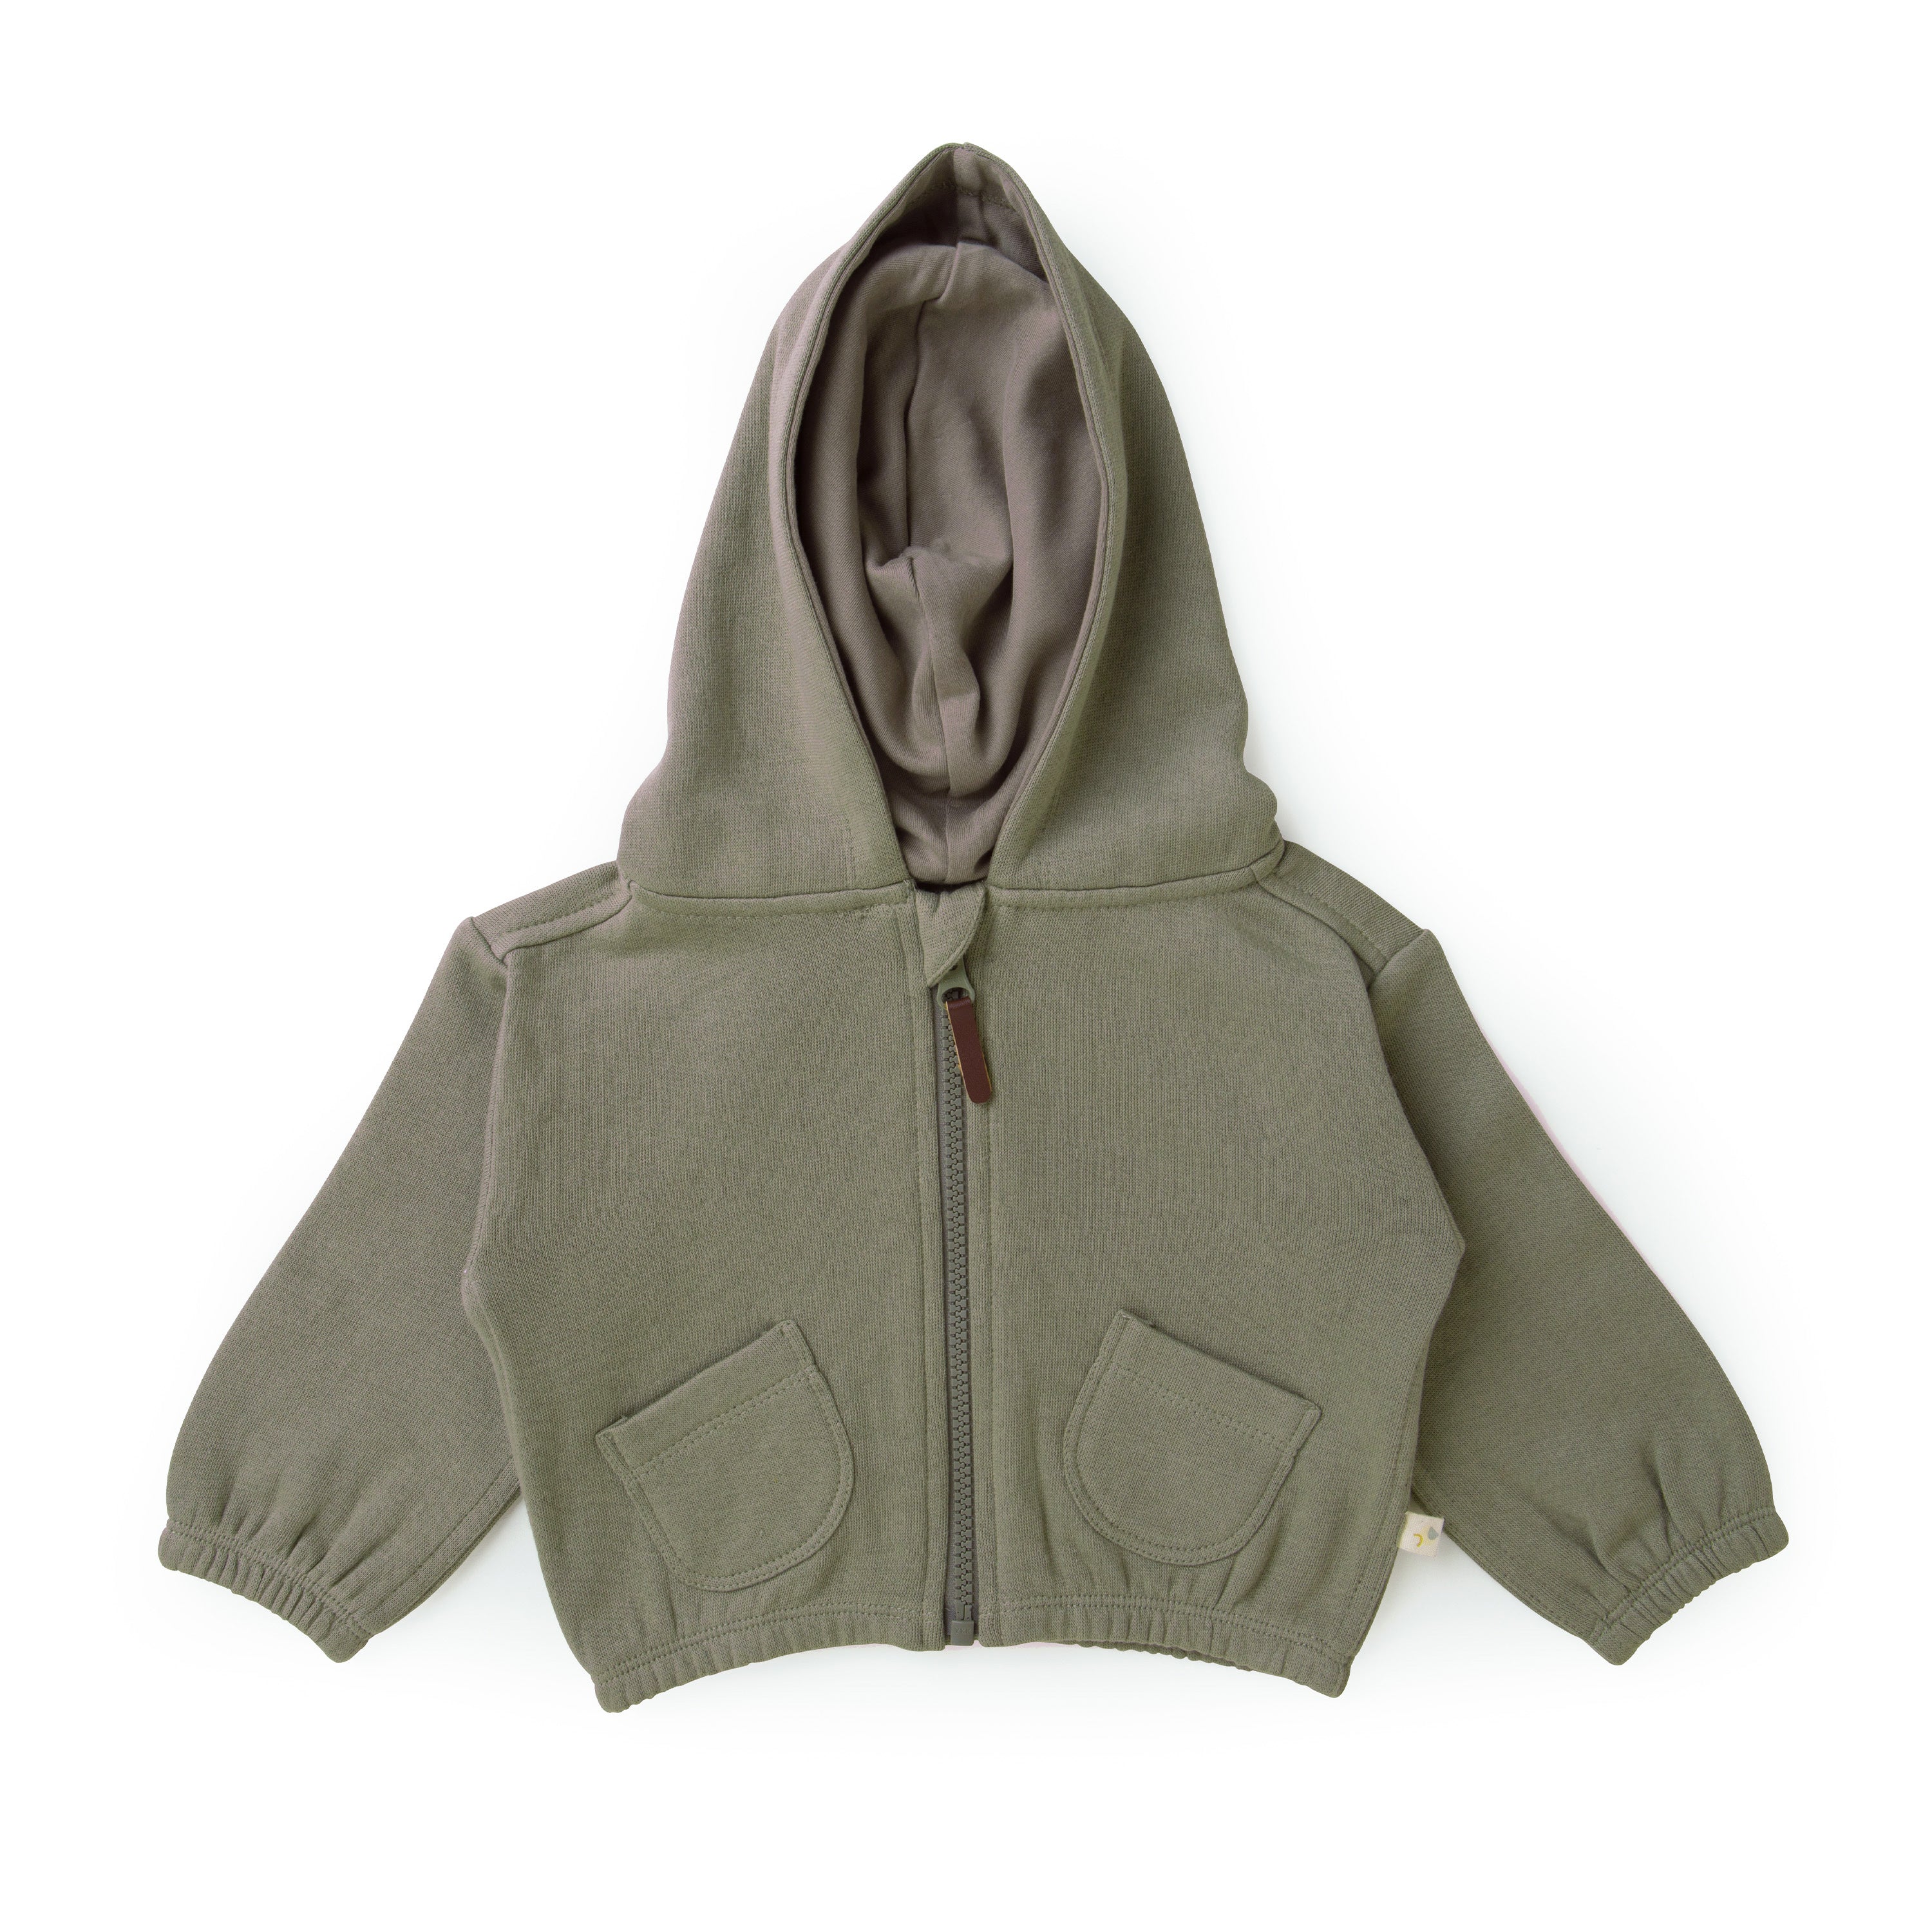 Organic Baby's olive green toddler's zip-up hoodie with a hood, displayed flat against a white background. The hoodie features two front pockets and ribbed cuffs.